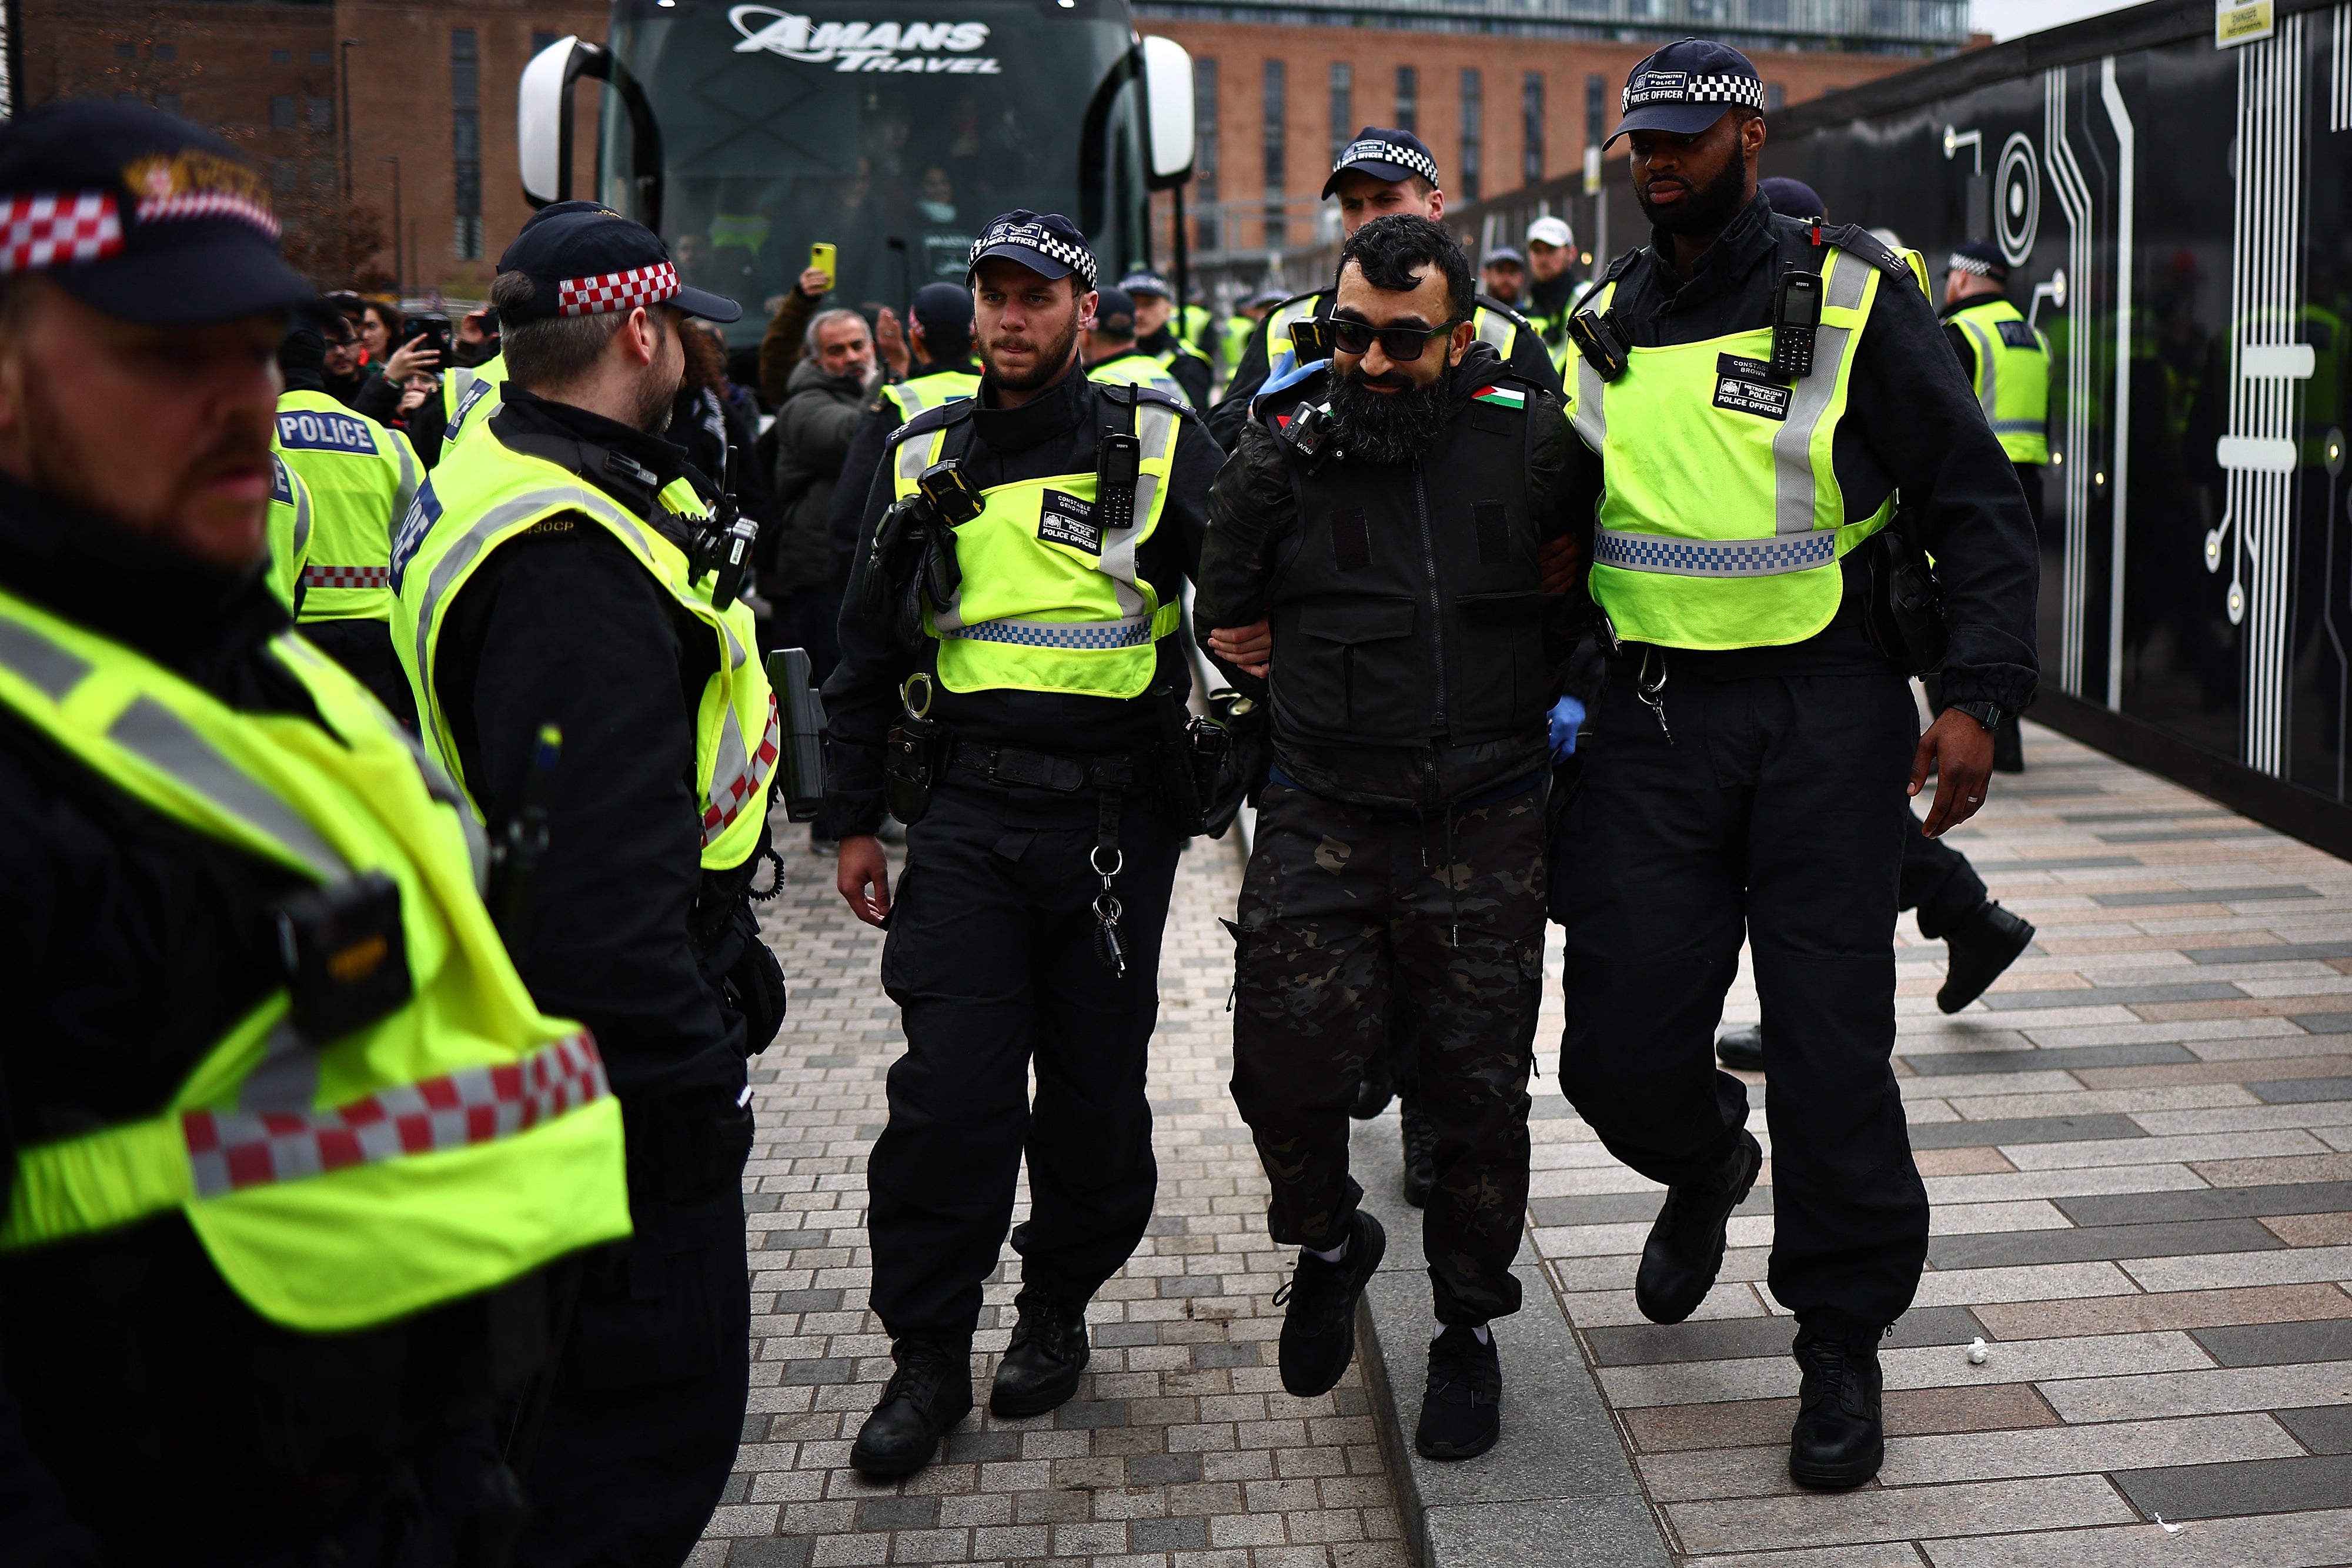 Police officers escort an arrested protester following a march through London